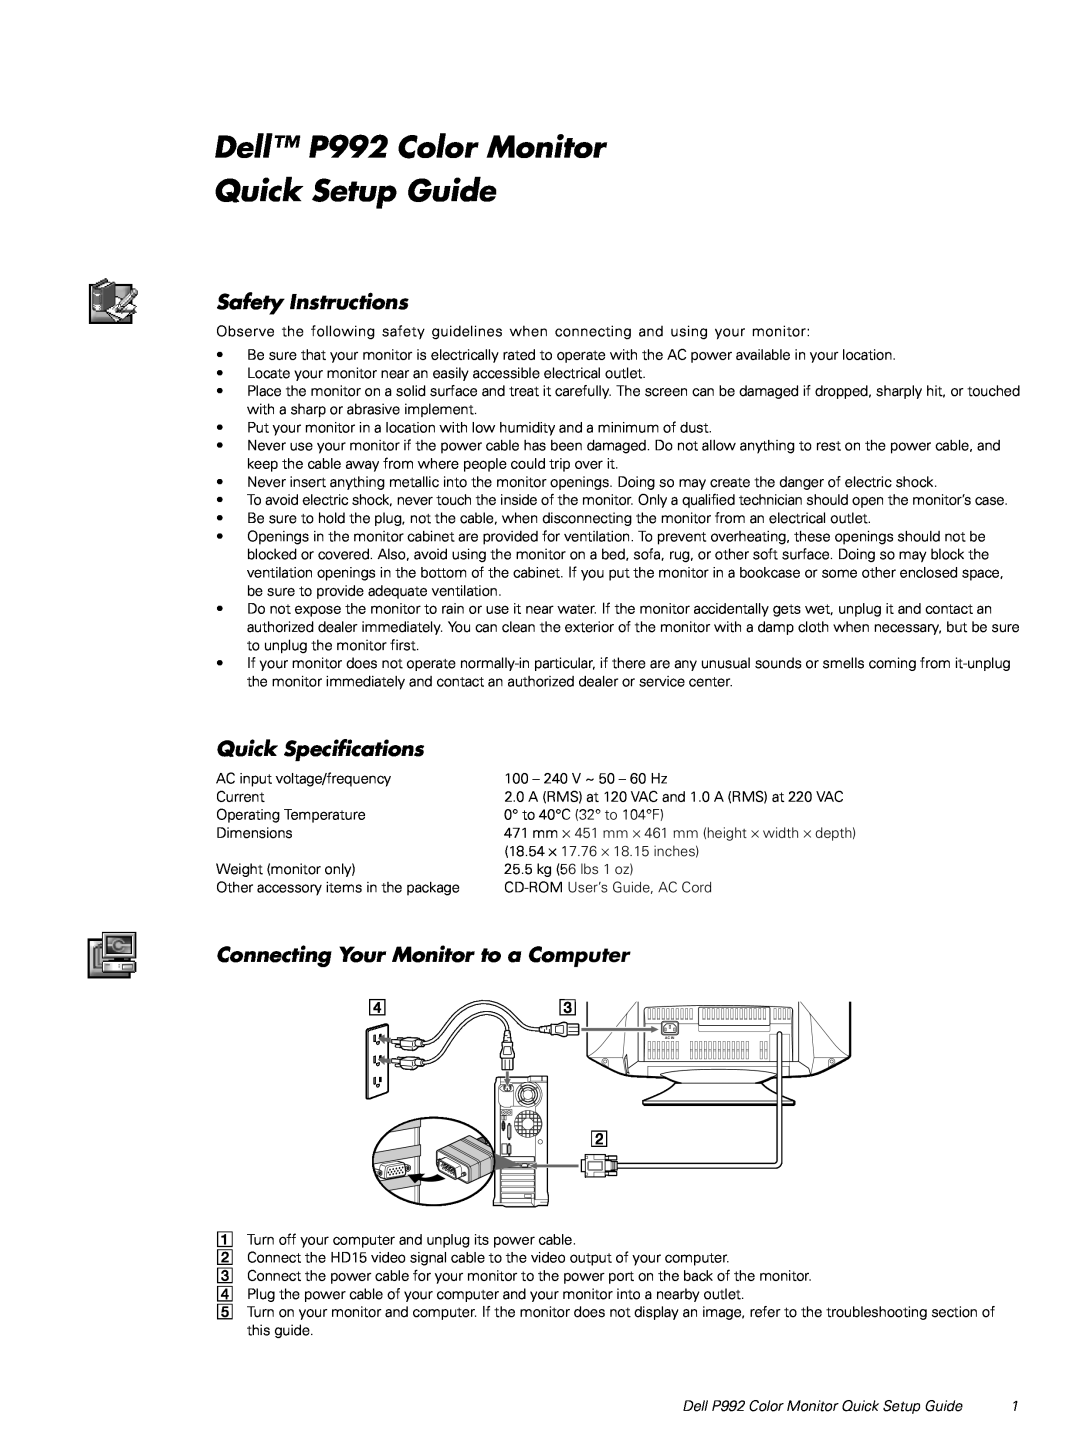 Dell P992 specifications Safety Instructions, Quick Specifications, Connecting Your Monitor to a Computer 